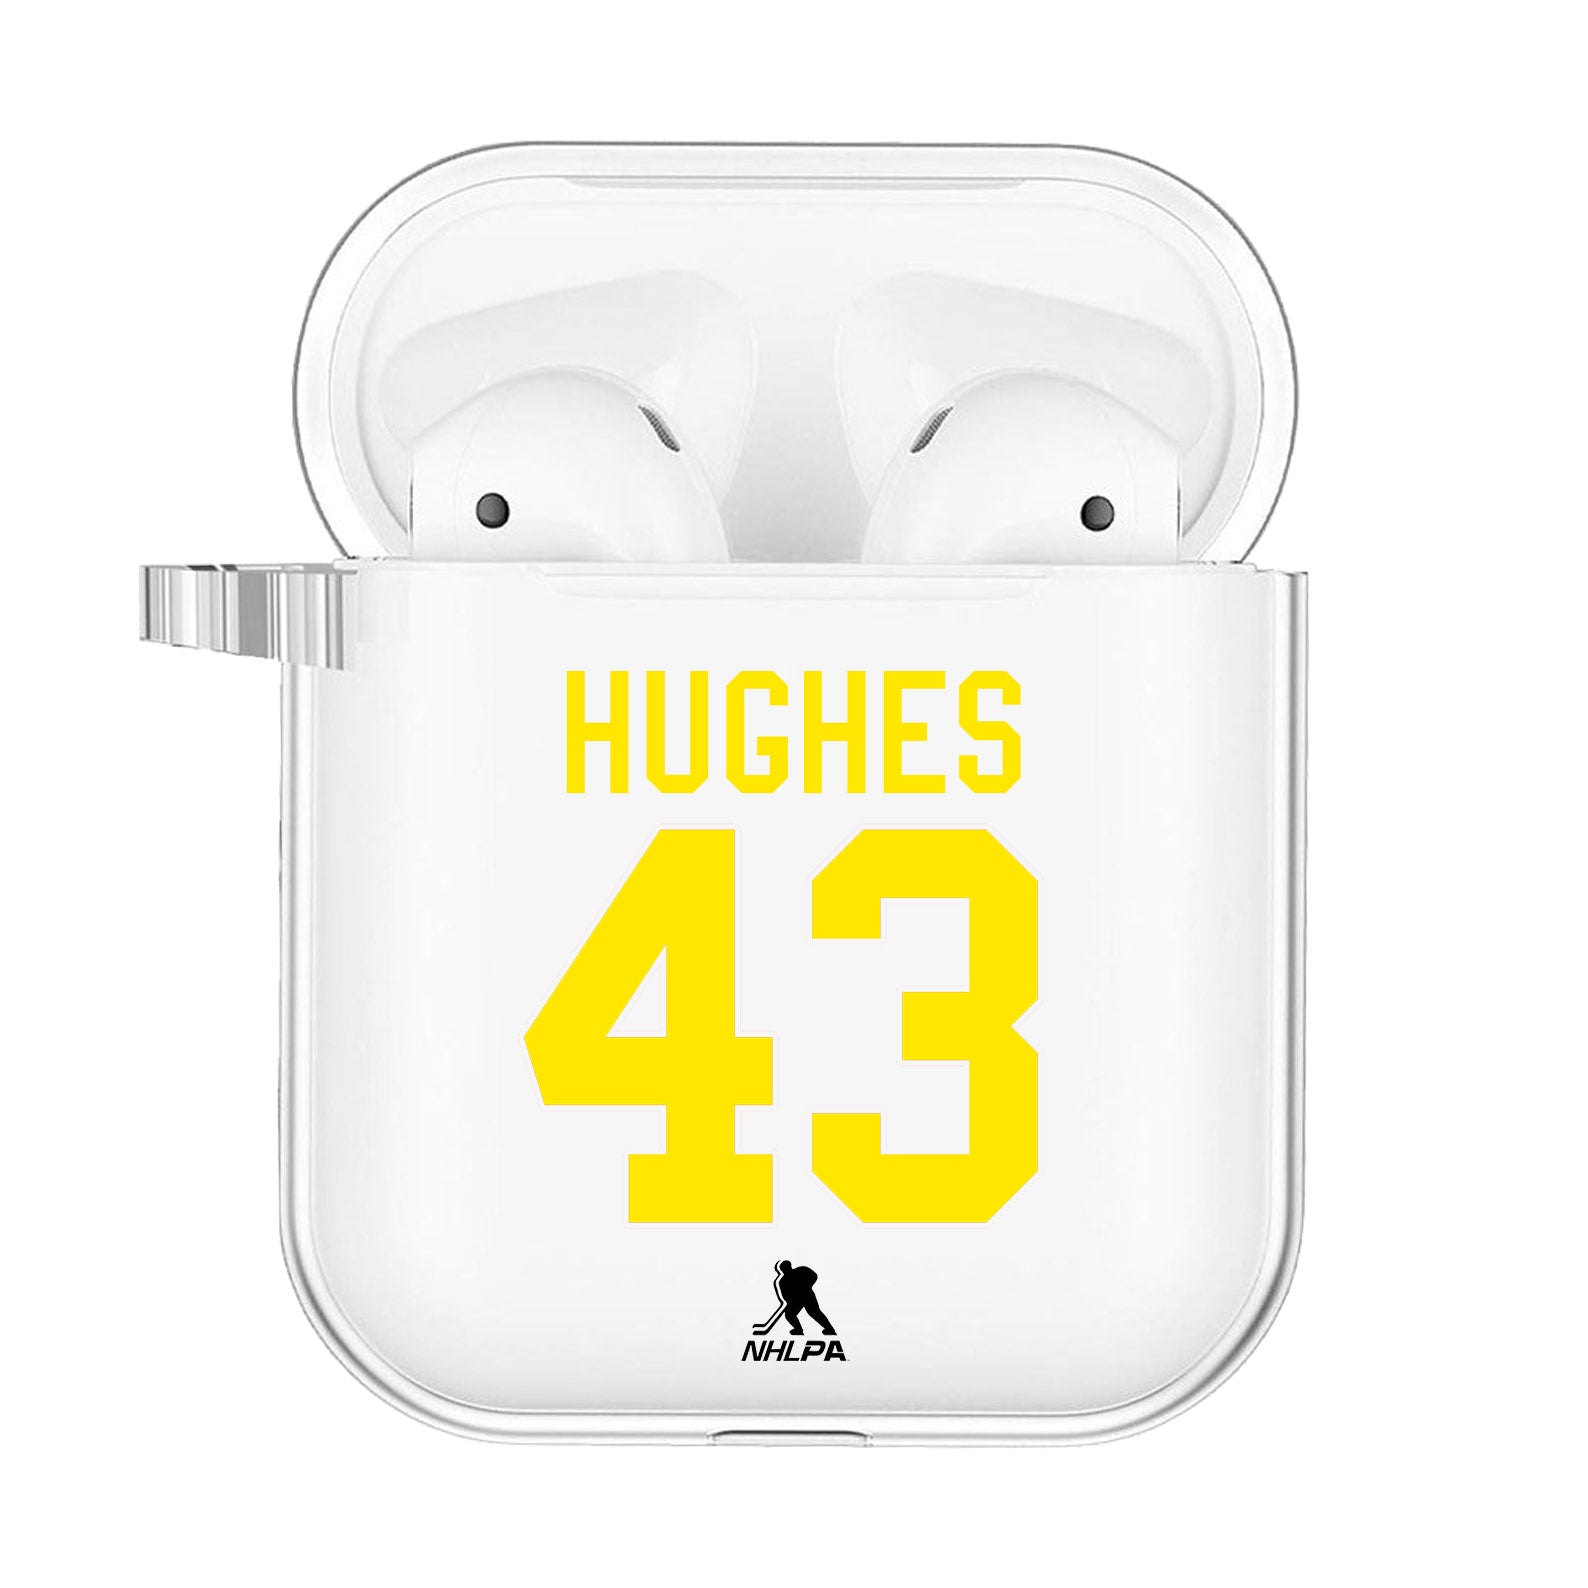 St Louis Blues NHL Airpods Case Cover for Air Pods Pro – cornfila